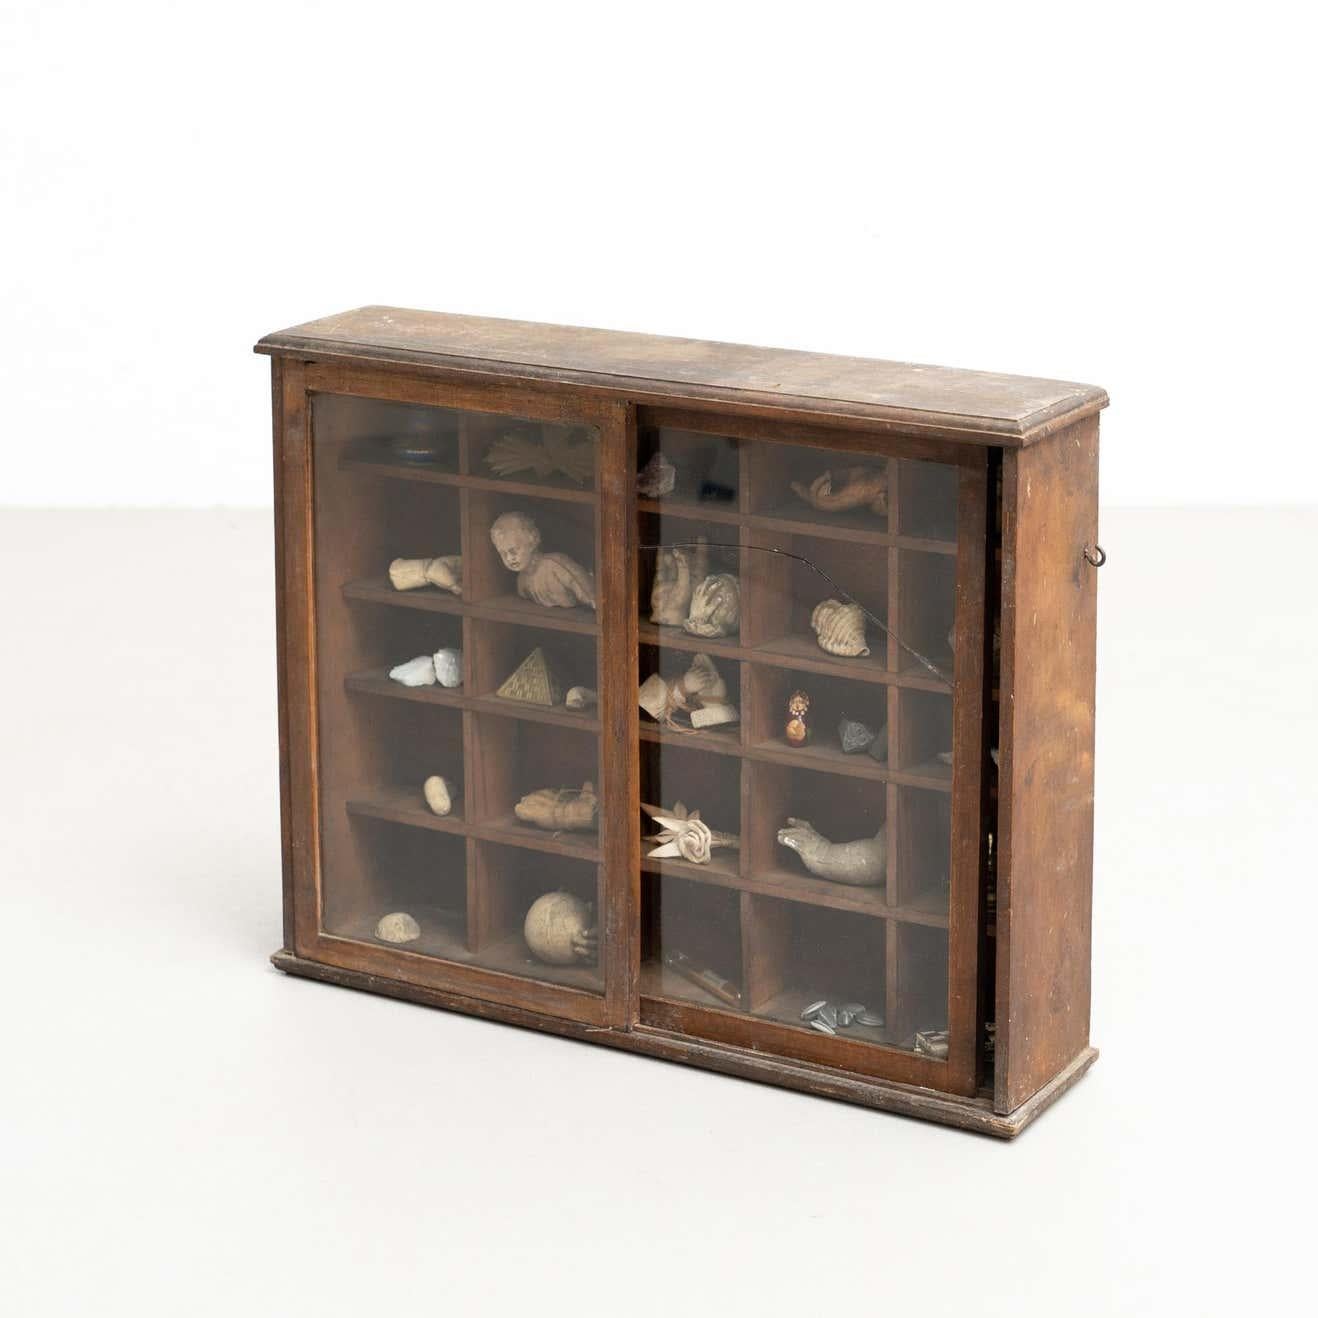 Spanish Cabinet of Curiosities Sculptural Artwork on a Wooden Cabinet, Circa 1950 For Sale